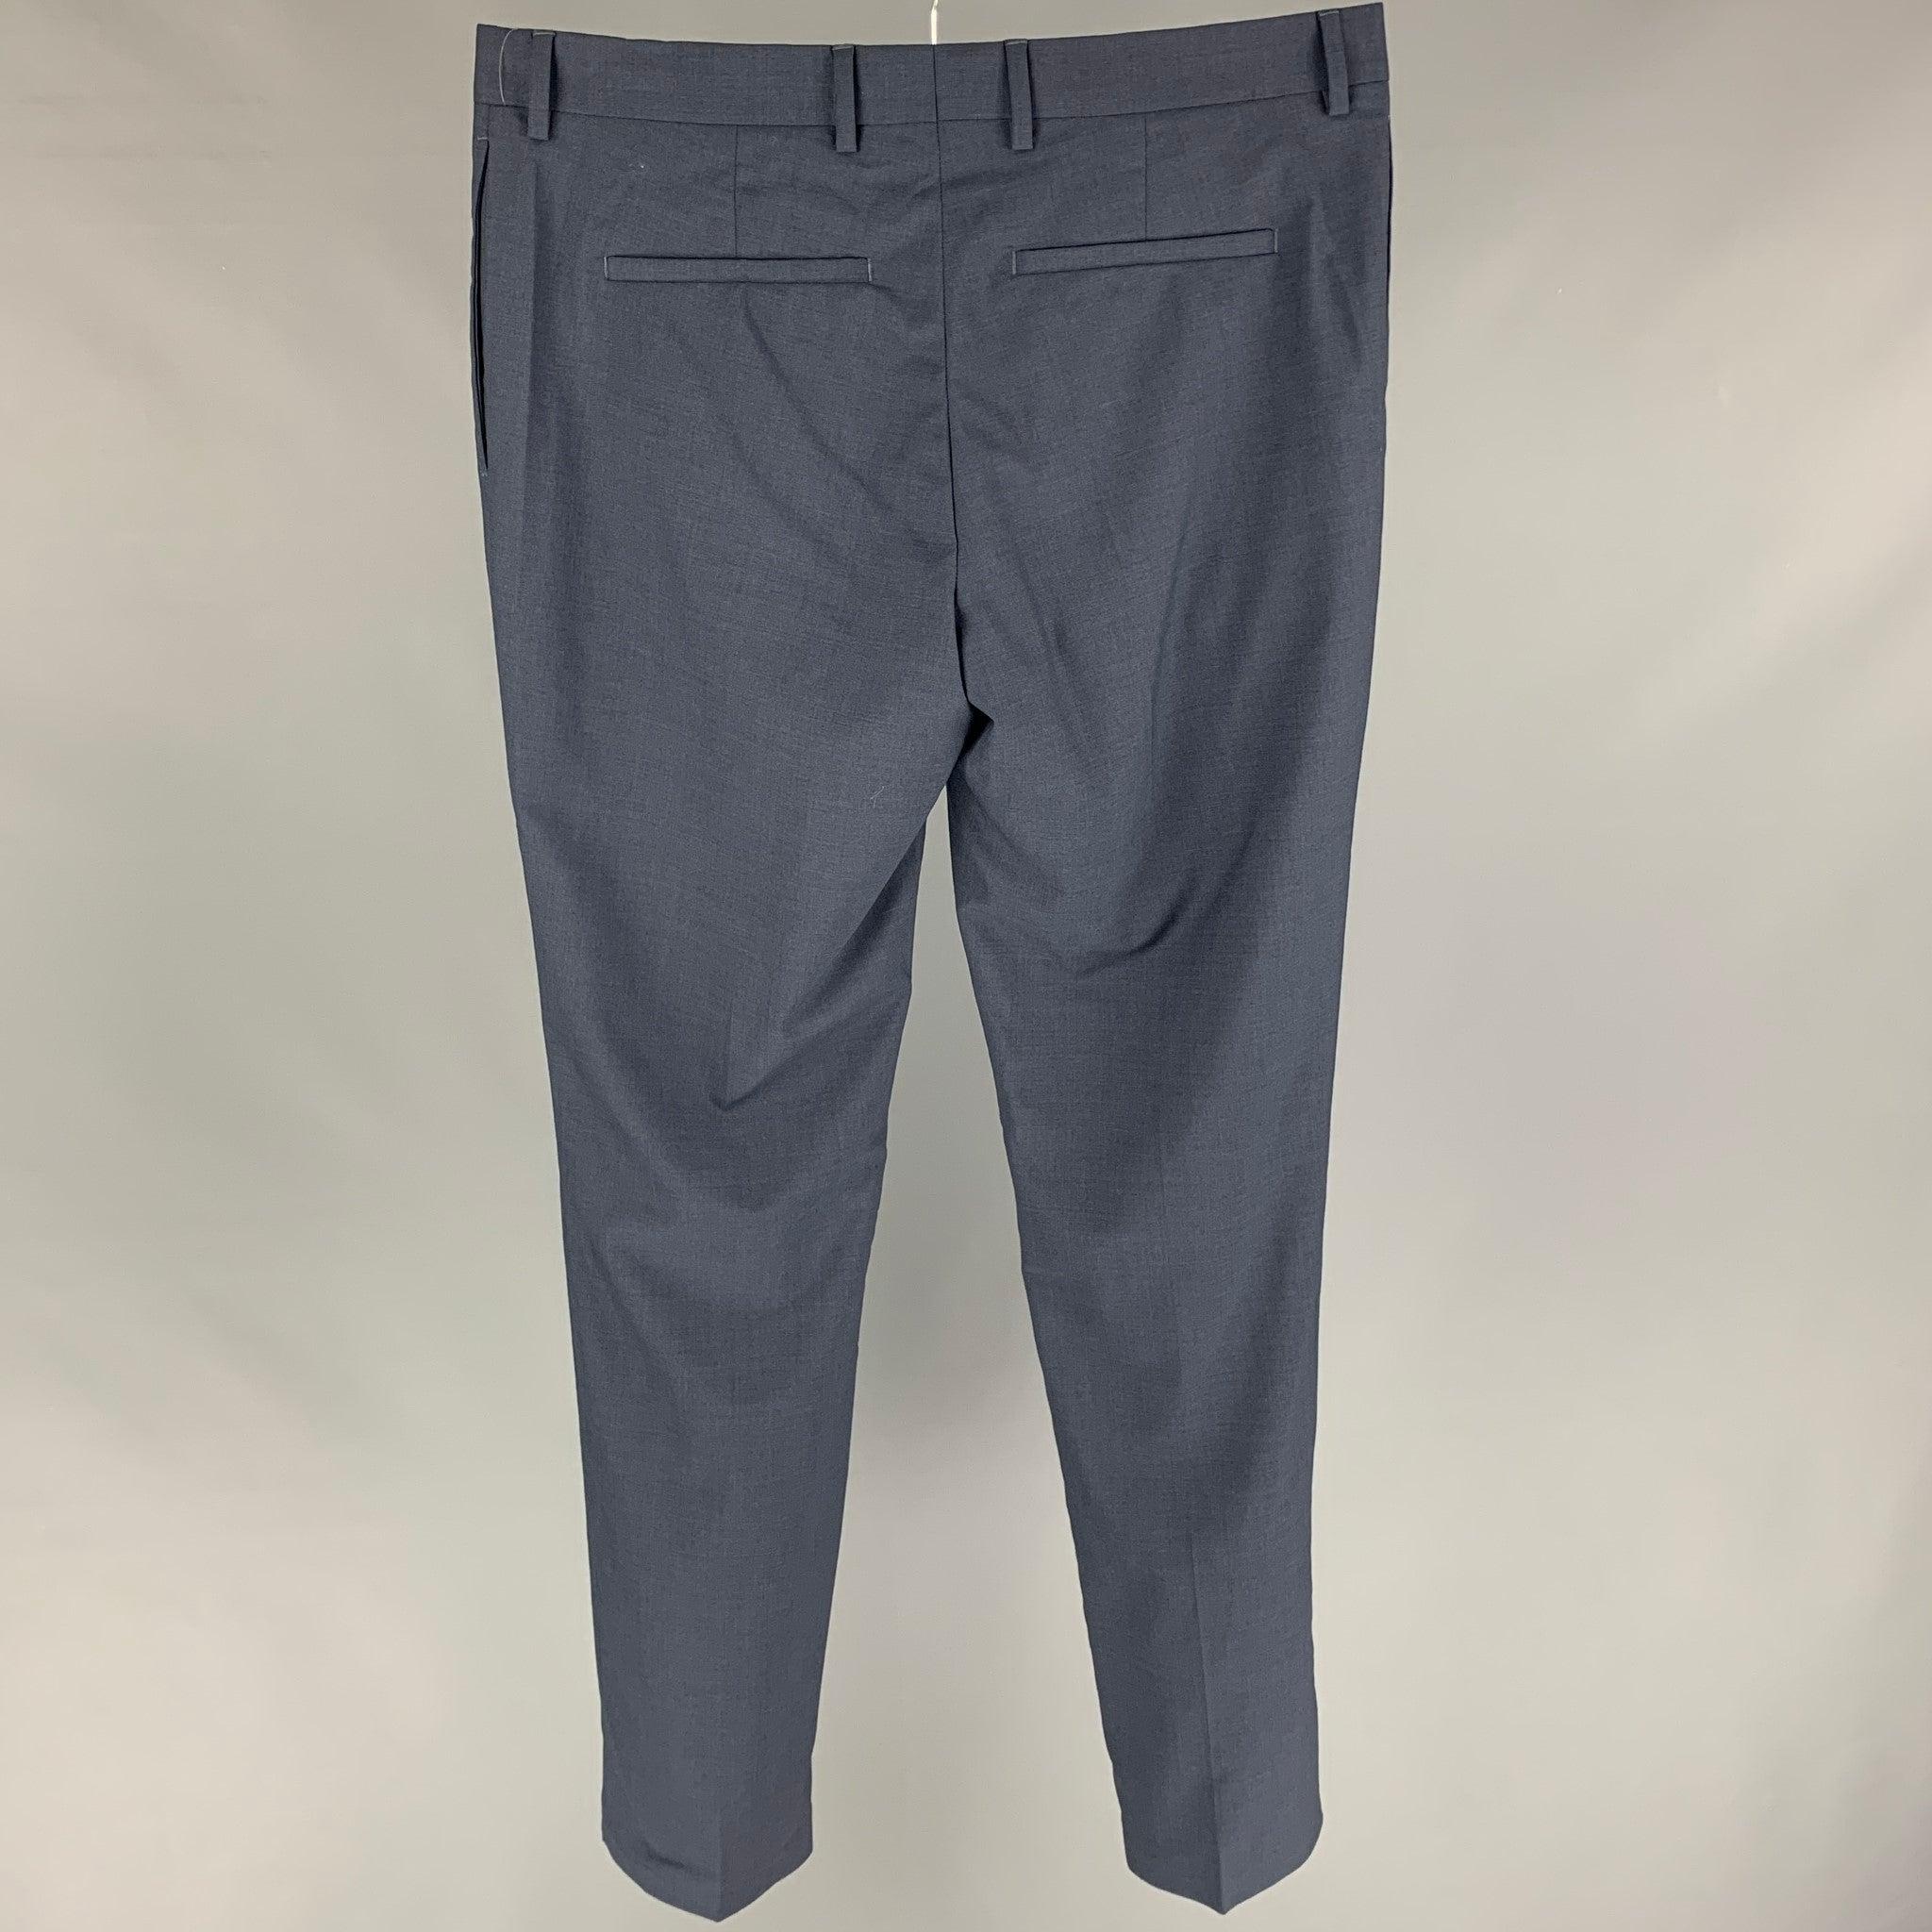 THE KOOPLES dress pants comes in a blue wool featuring a flat front, slim fit, front tag, and a zip fly closure.
New with tags.
 

Marked:   48 

Measurements: 
  Waist: 34 inches Rise: 9 inches Inseam: 34 inches Leg Opening: 14 inches 
  
  
